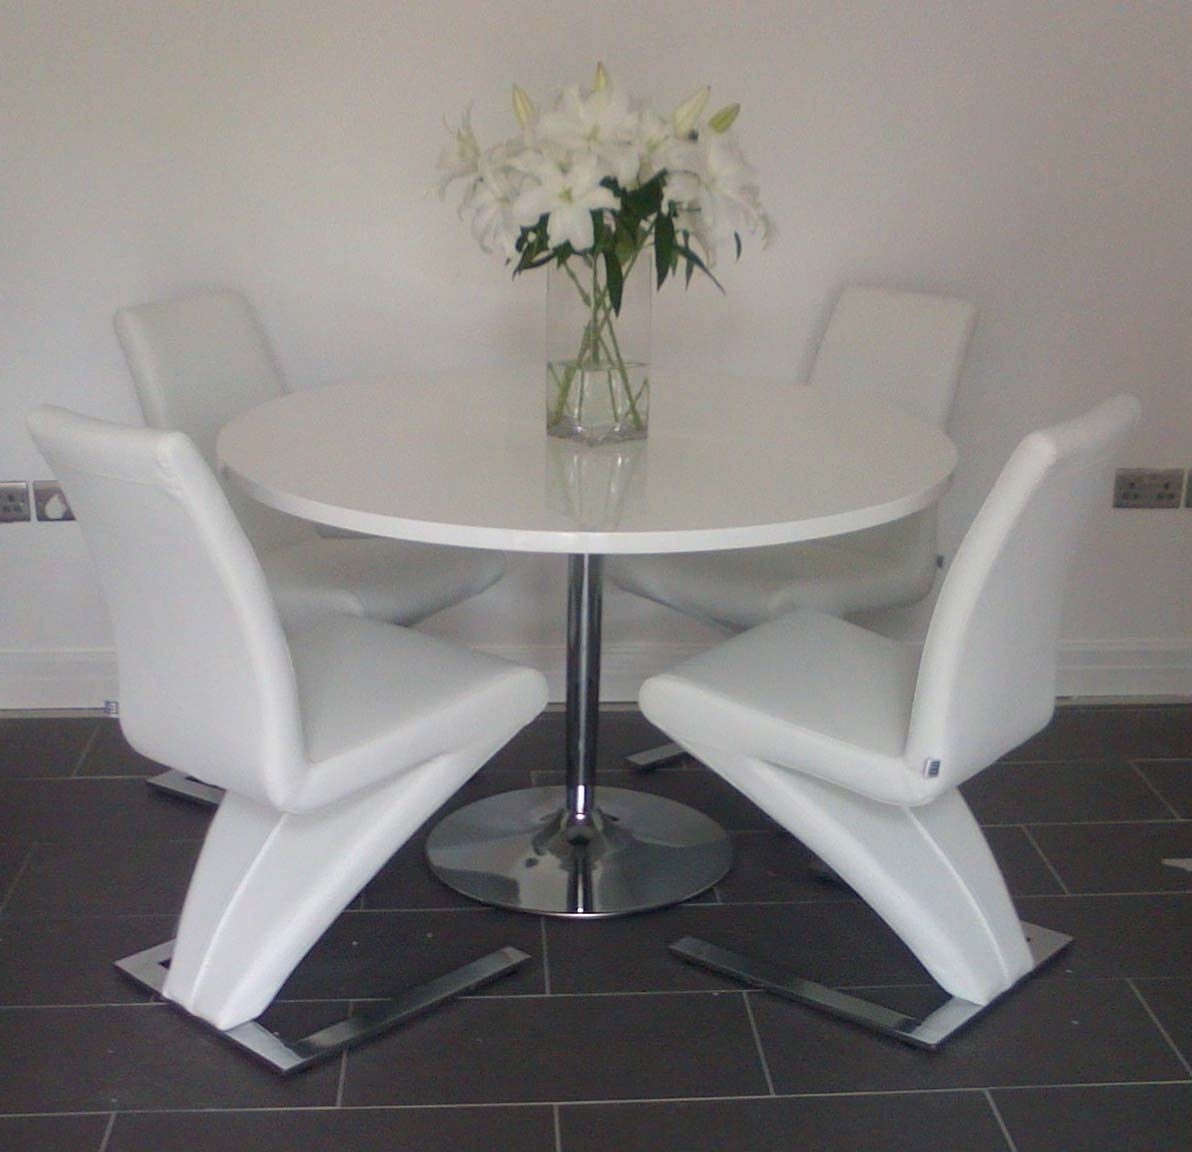 White Gloss Dining Furniture Within Most Popular Becky Round White High Gloss Dining Table 120cm (discontinued (View 21 of 25)